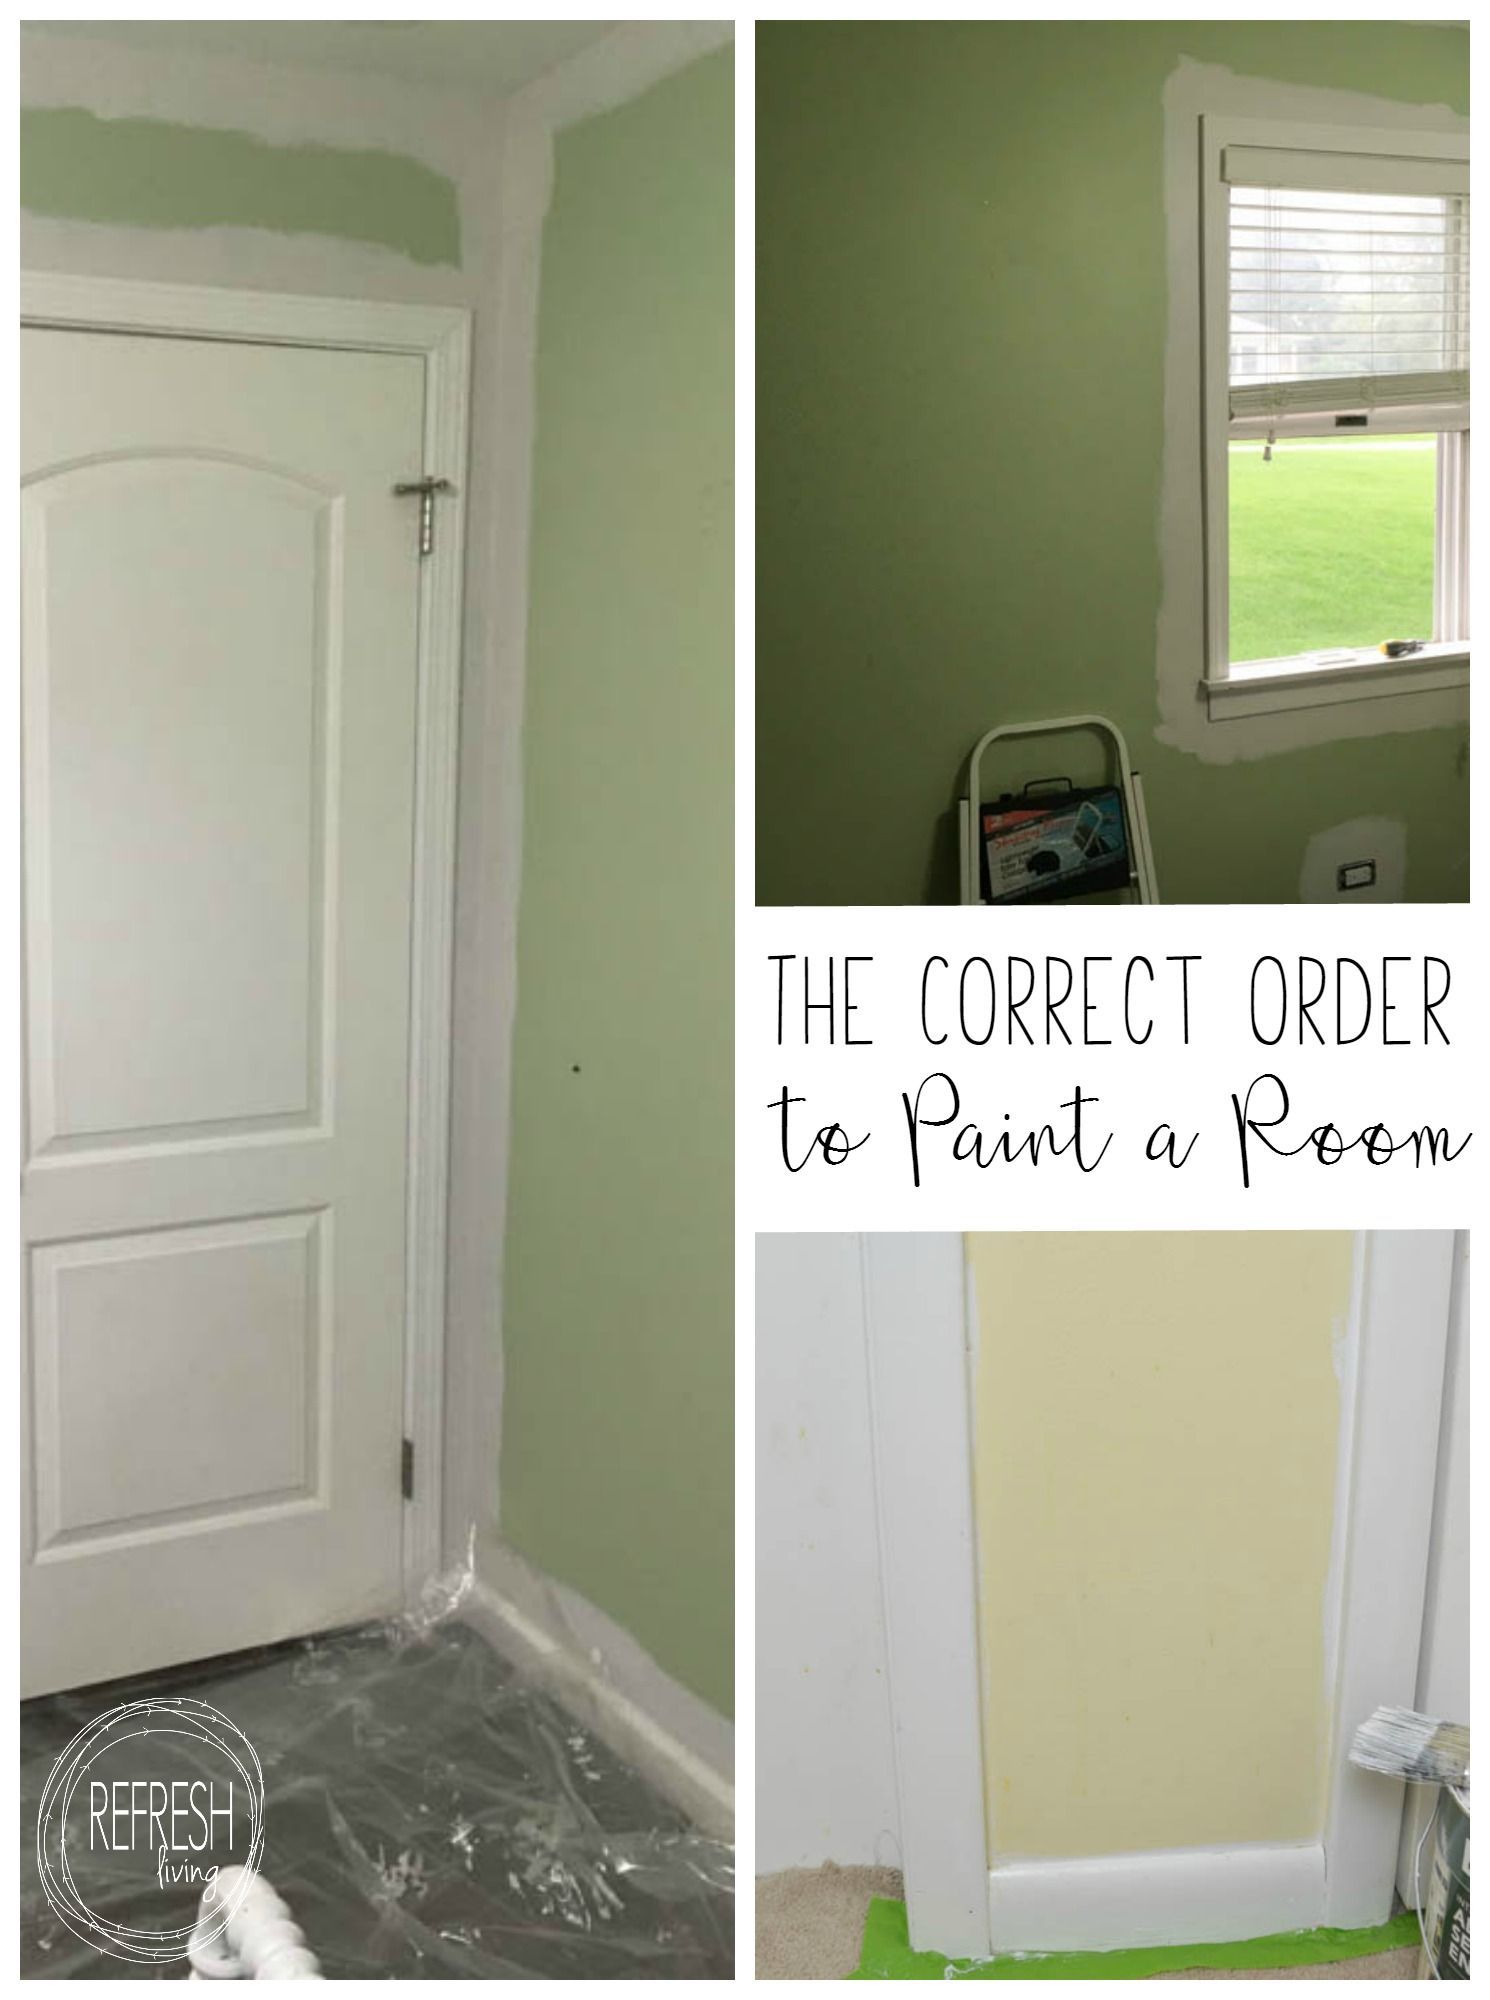 How to Paint a Room (The Correct Order of Operations) - Refresh Living - How to Paint a Room (The Correct Order of Operations) - Refresh Living -   14 diy Room painting ideas